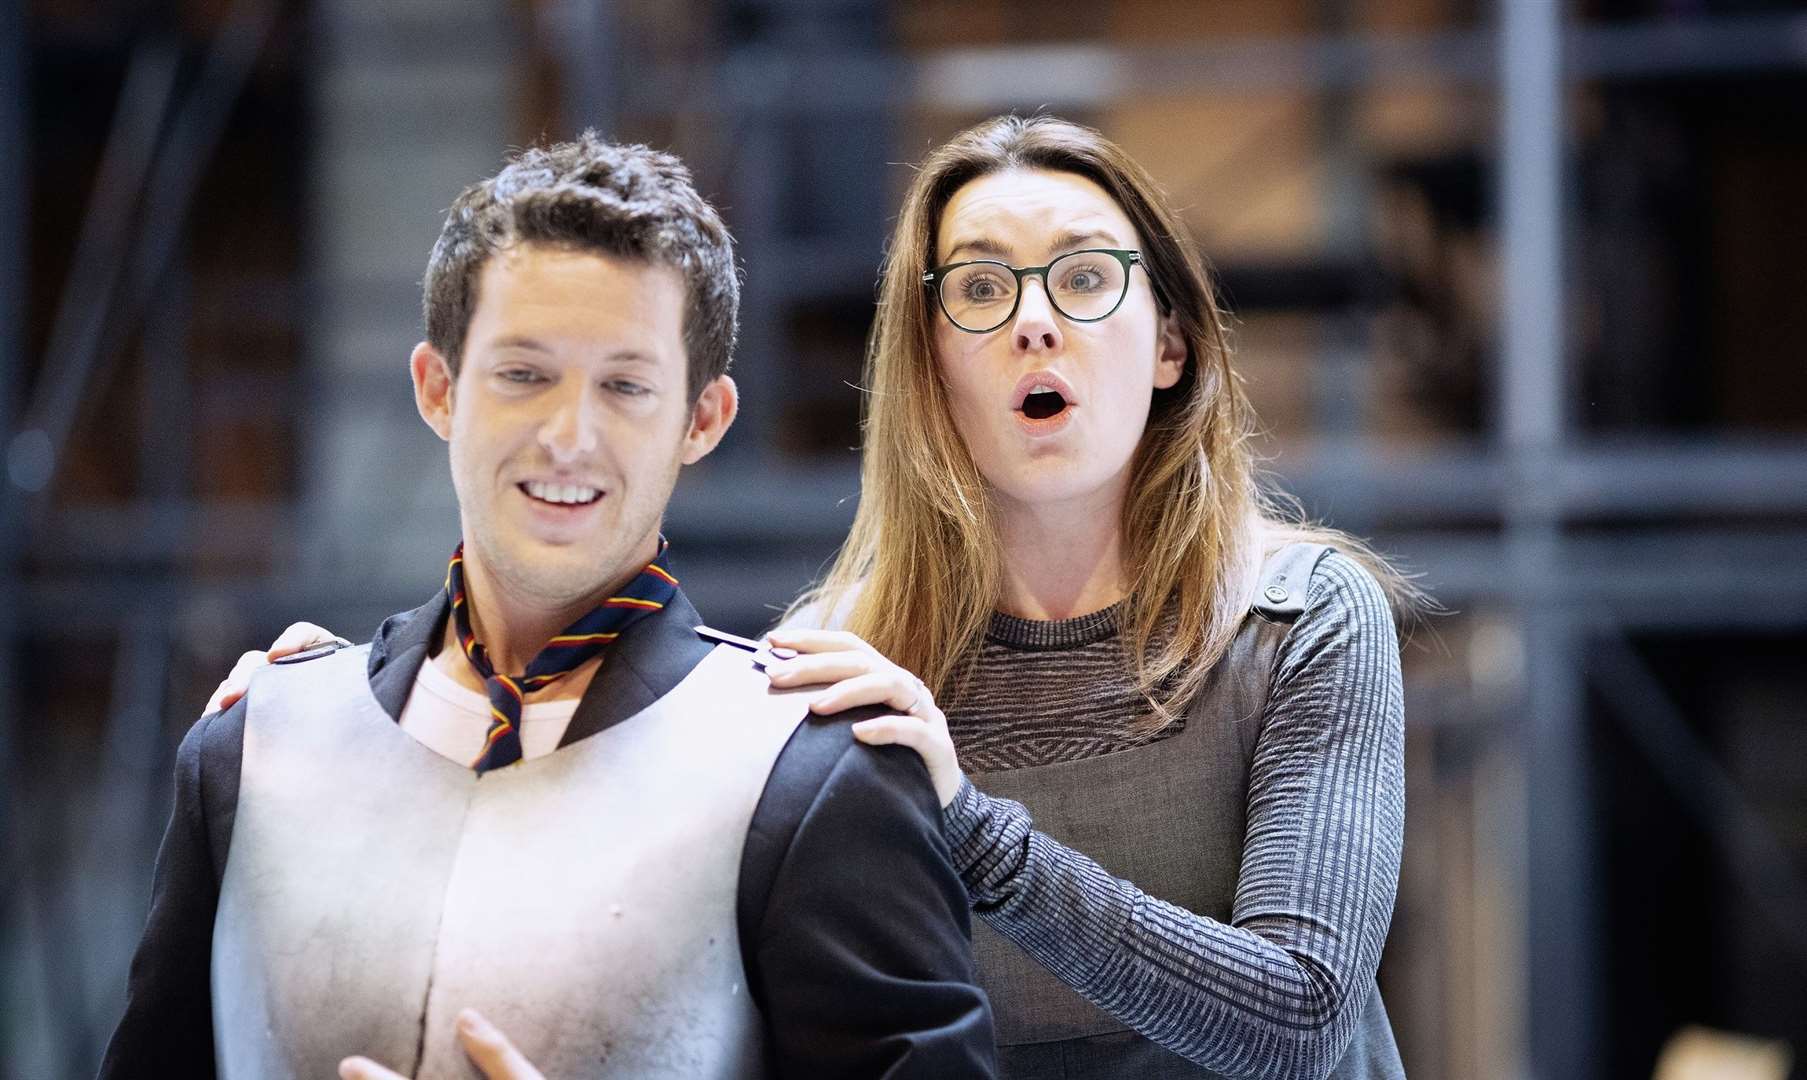 Rinaldo rehearsal for the Glyndebourne tour, featuring Jake Arditti is Rinaldo and Anna Devin is Almirena